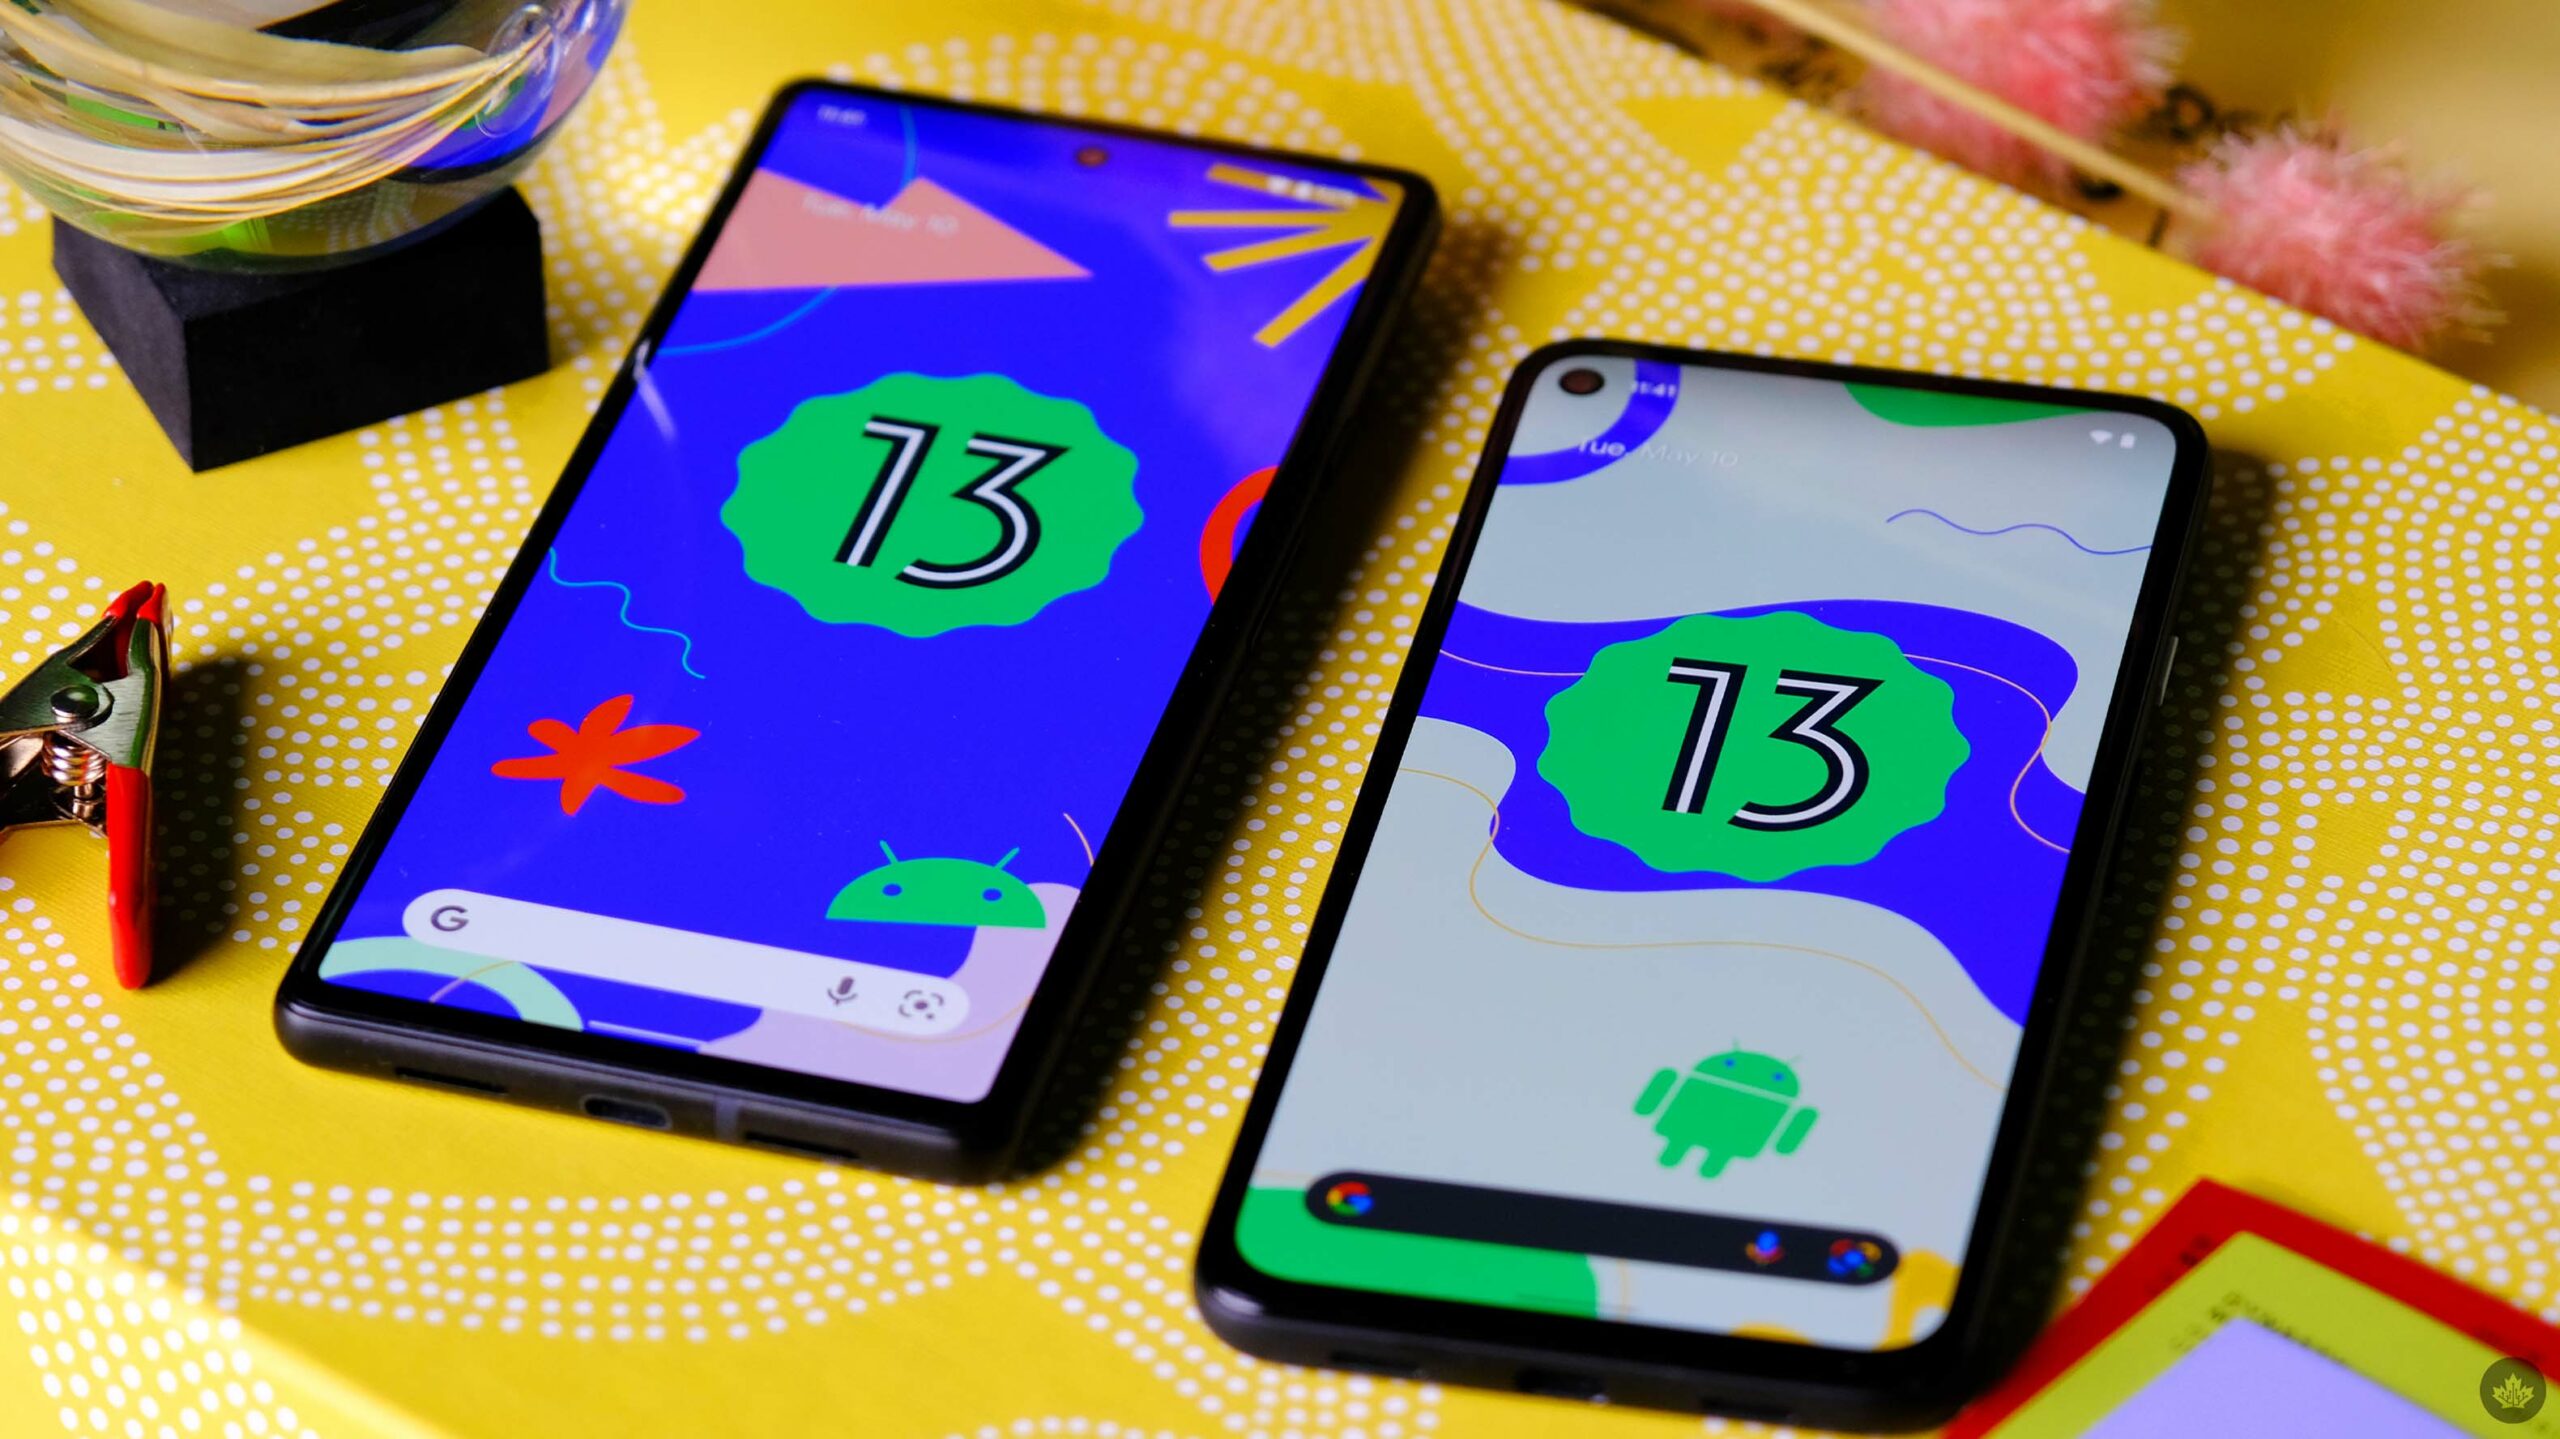 Android 13 logo on phones